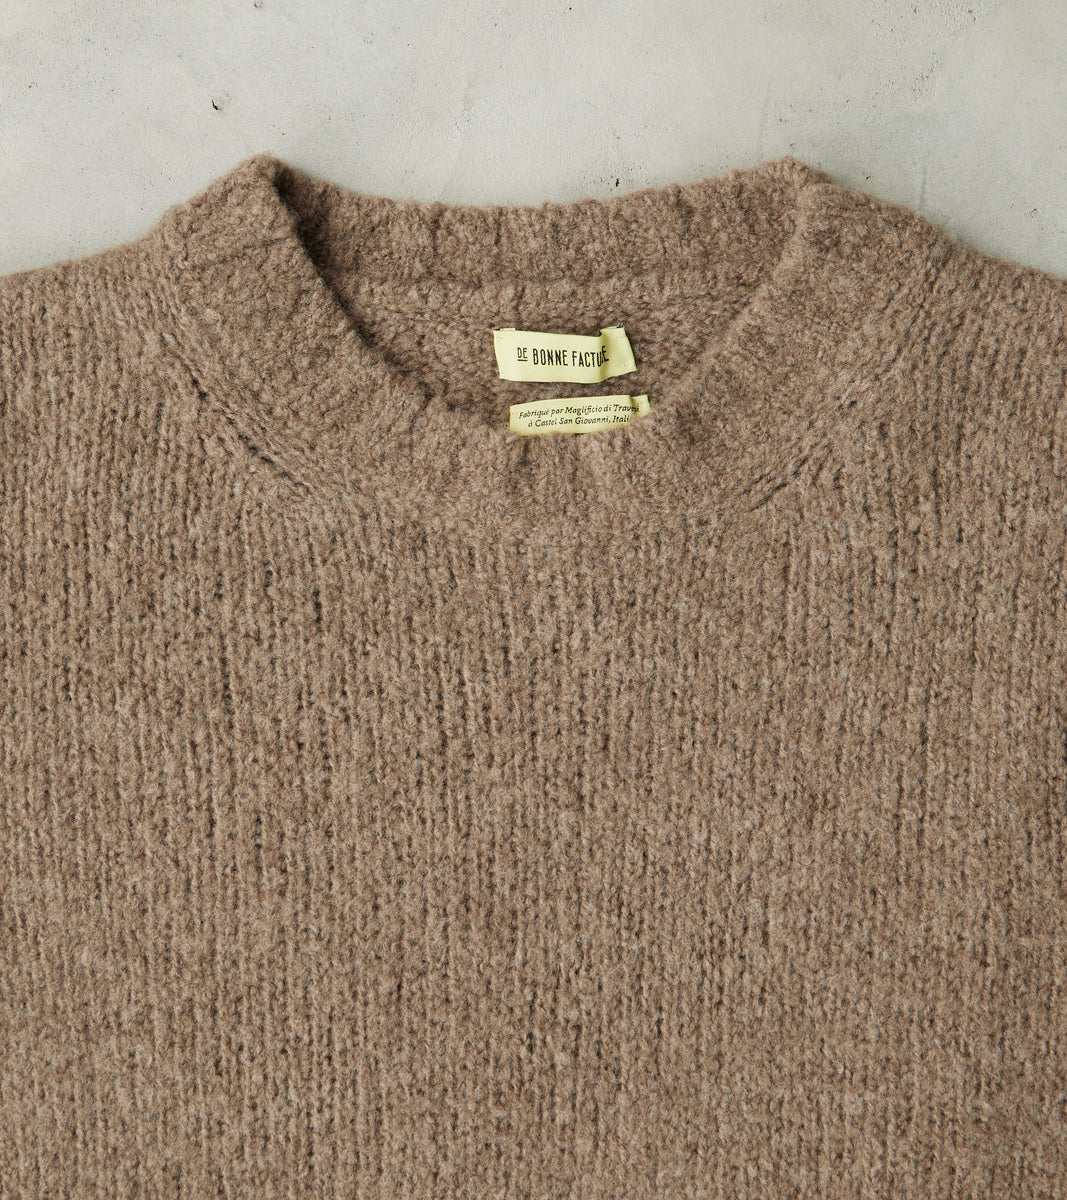 Boucle Wool Crewneck Knit Sweater - Undyed Taupe